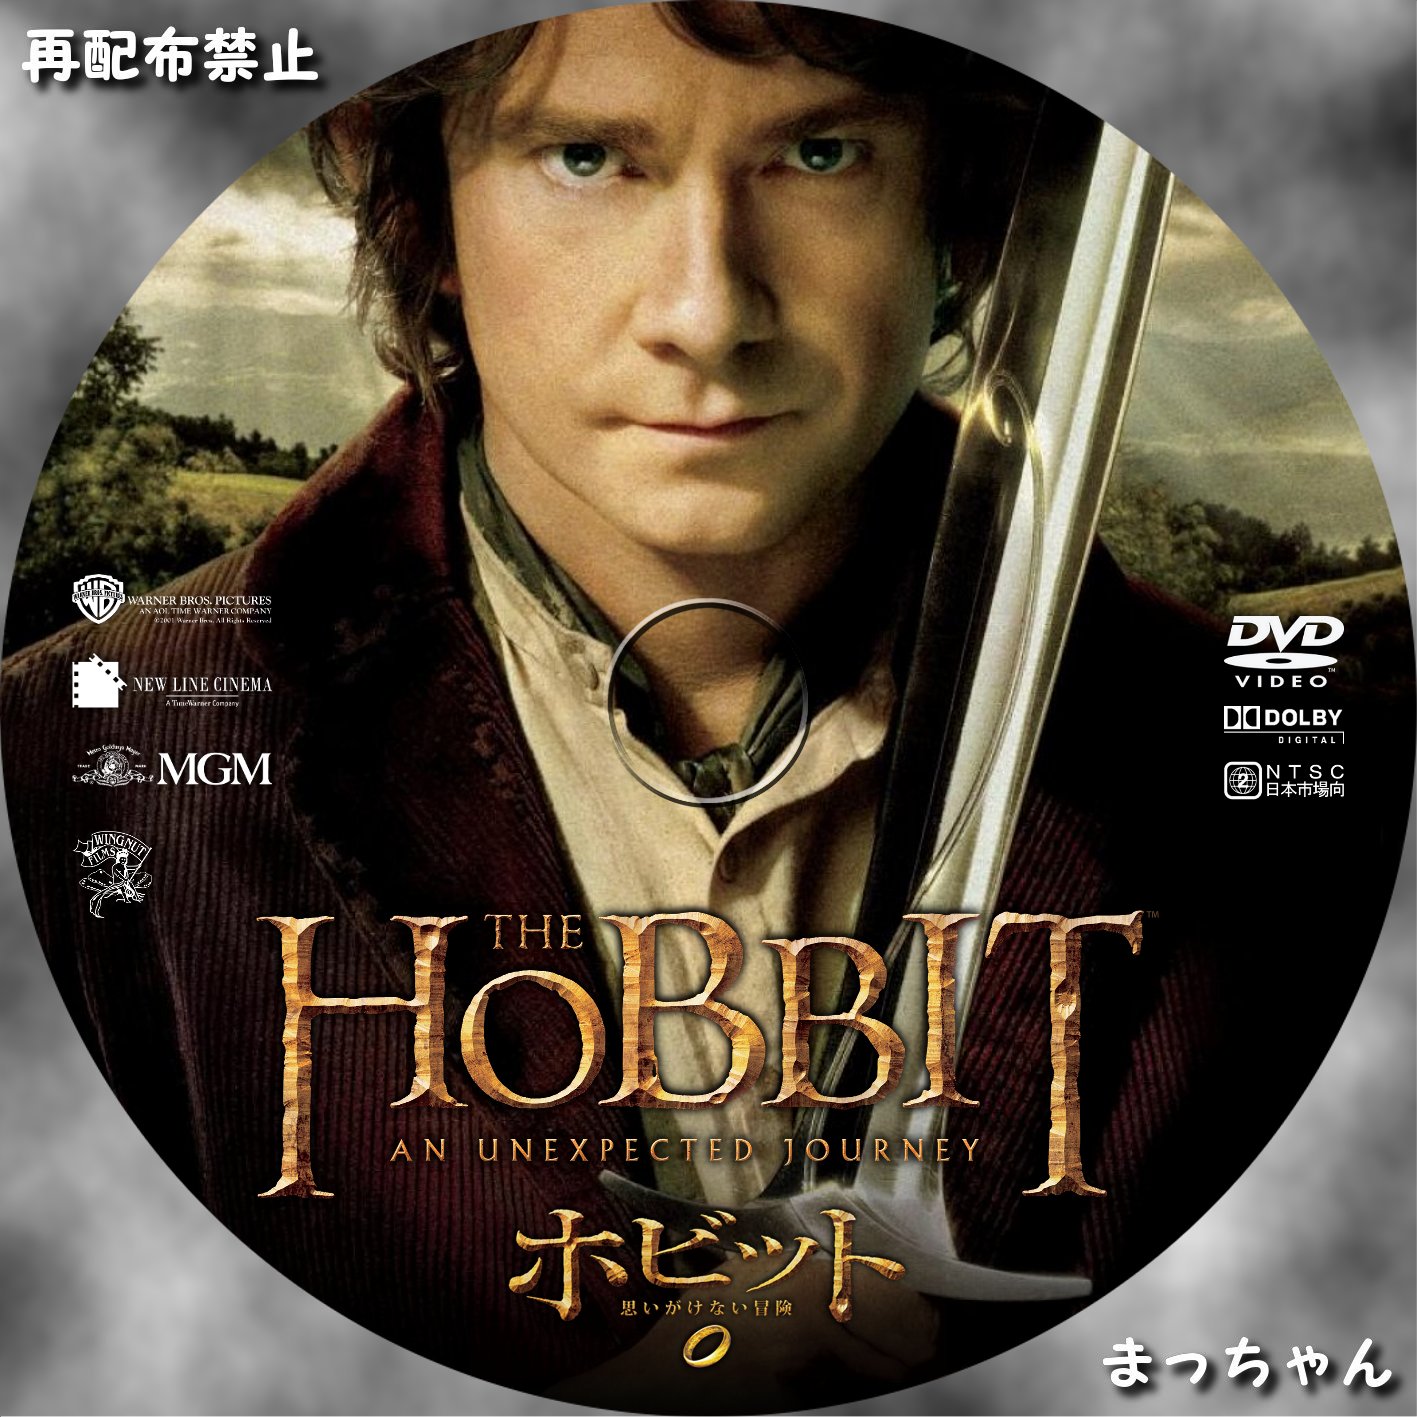 The Hobbit An Unexpected Journey 2012 Movie Cam -Ccn